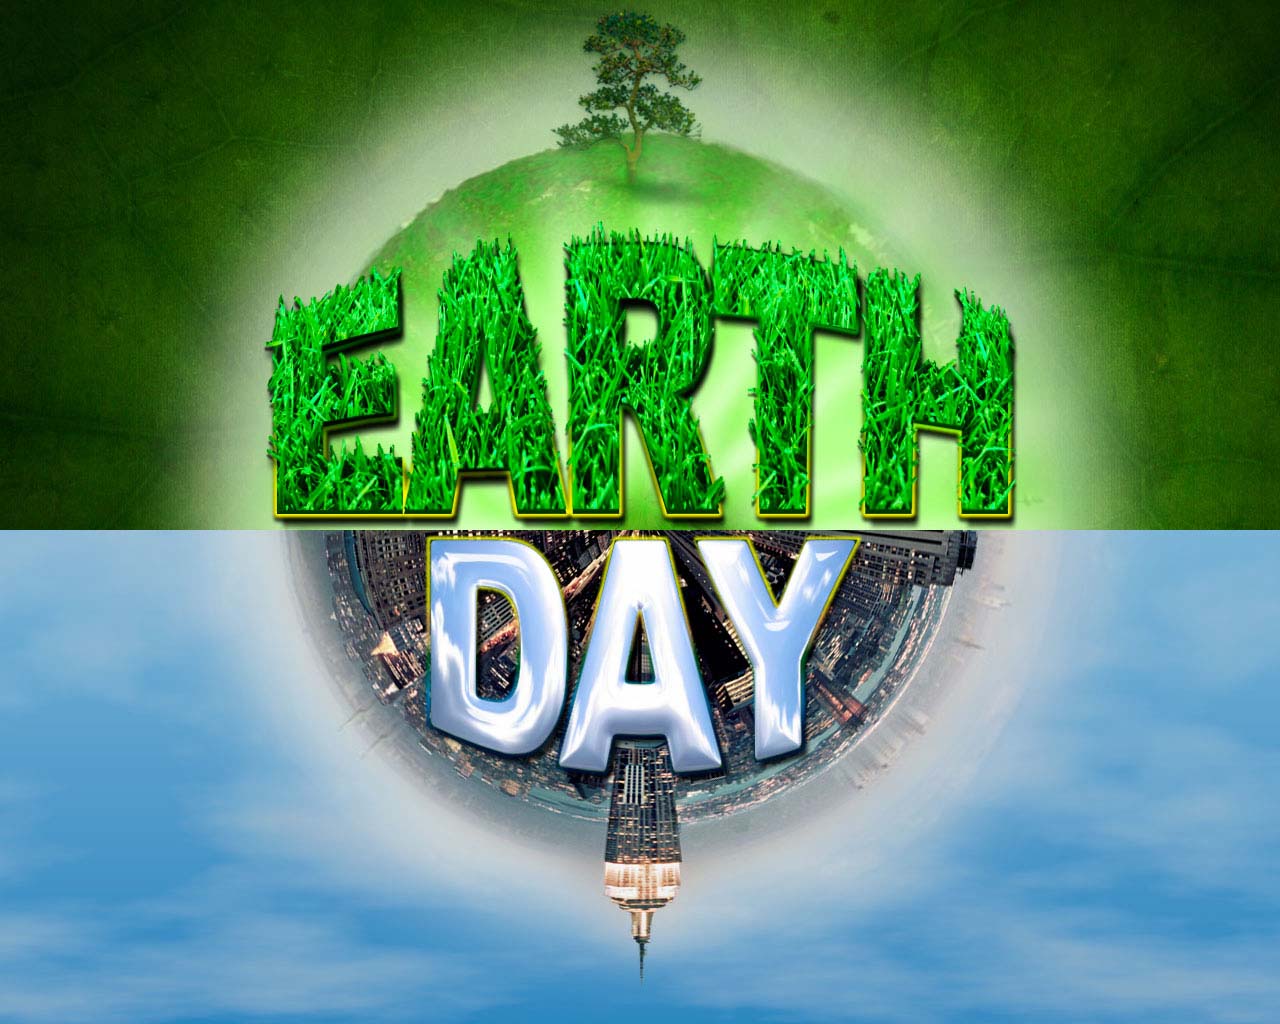 ppt-bird-i-saw-i-learned-i-share-earth-day-2012-powerpoint